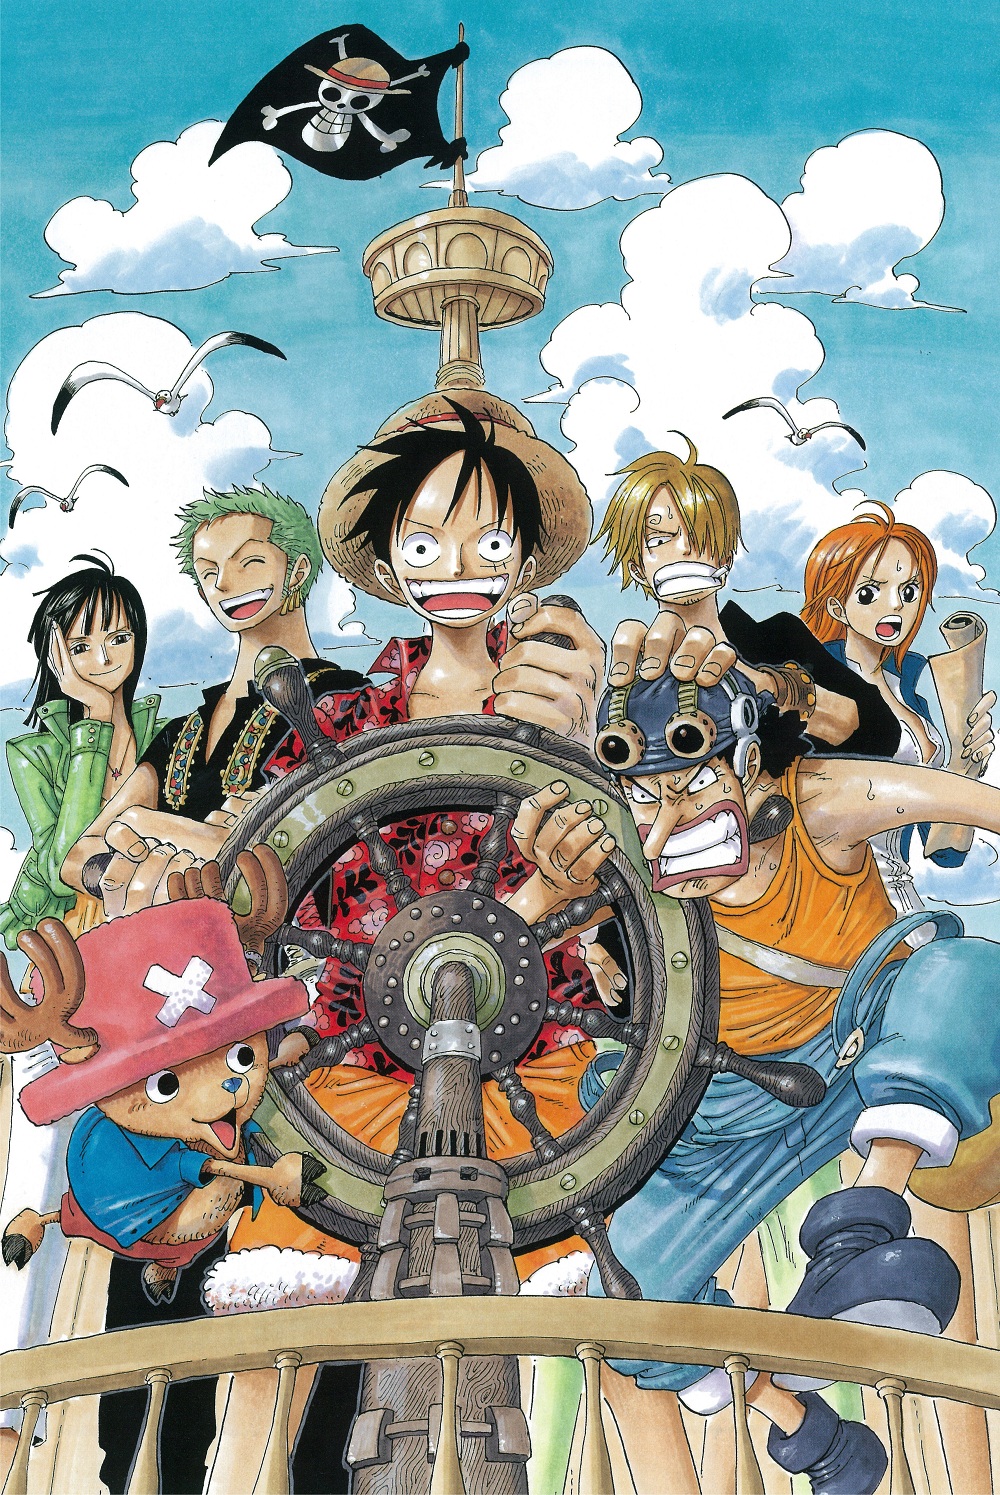 Wallpaper One Piece Hd Untuk Hp Android